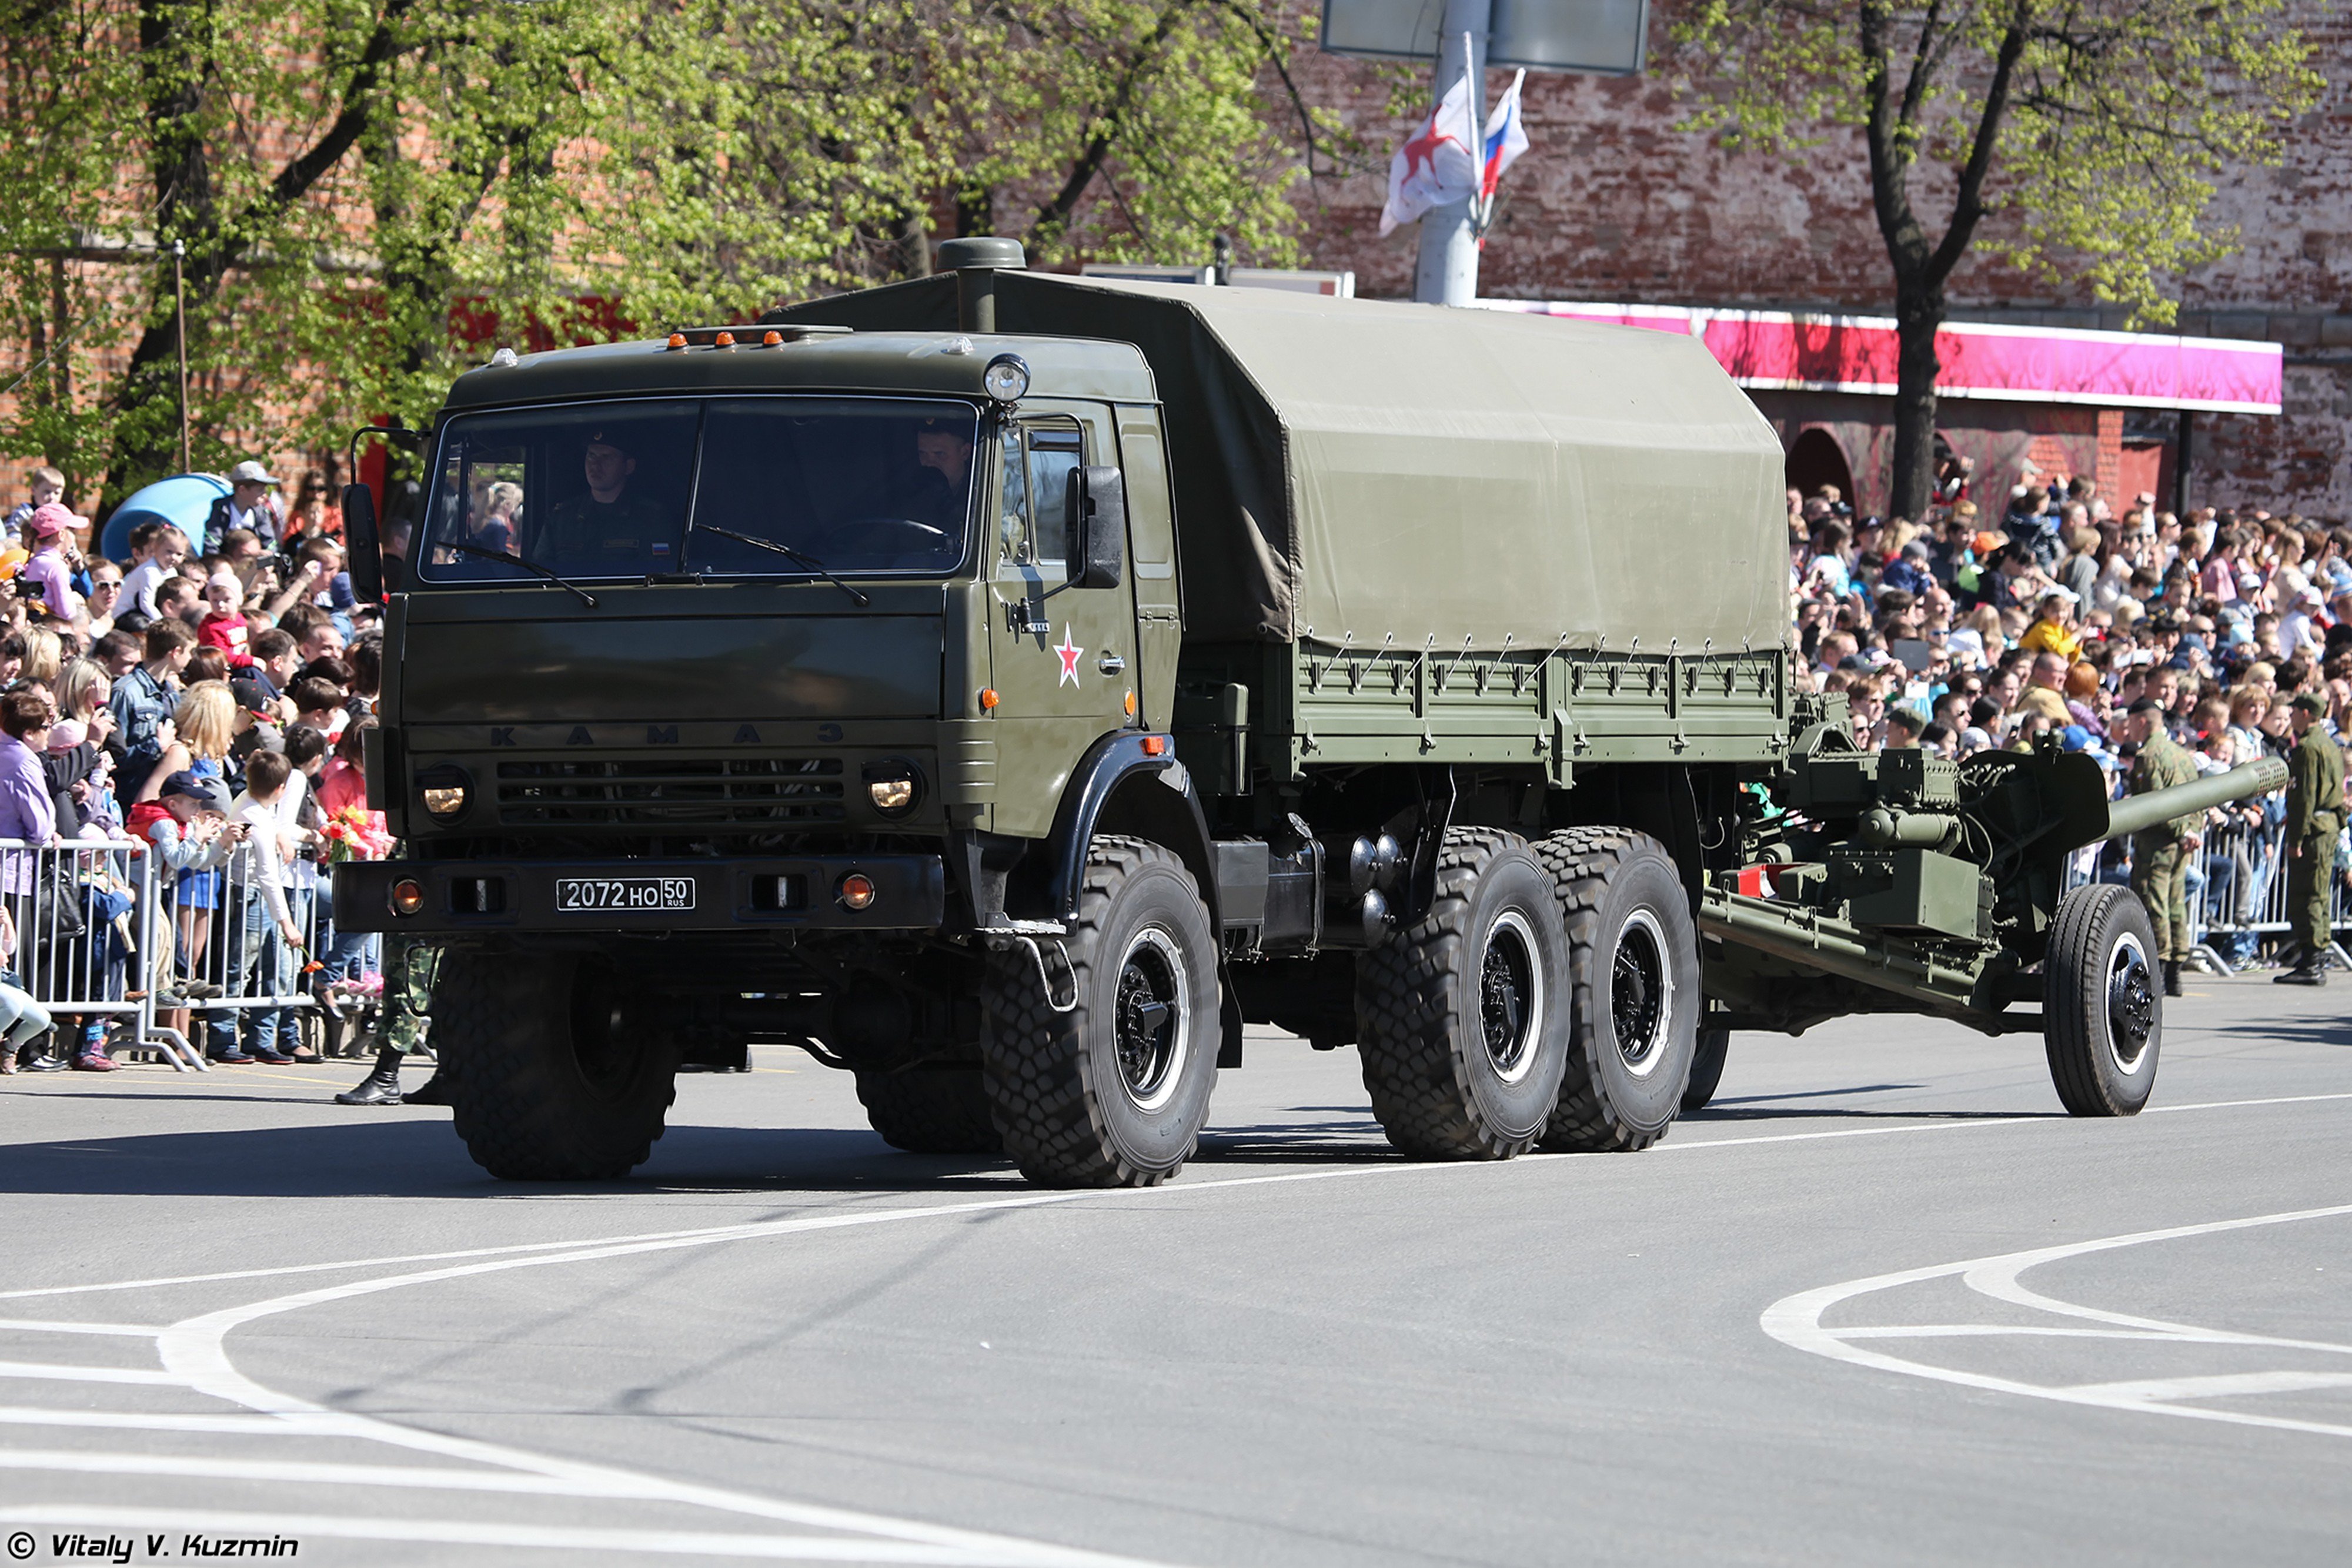 2014, Victory, Day, Parade in nizhny novgorod, Russia, Military, Russian, Army, Red star, Truck, Kamaz 43114, With, 100mm, Gun, Mt 12r, 4000x2667 Wallpaper